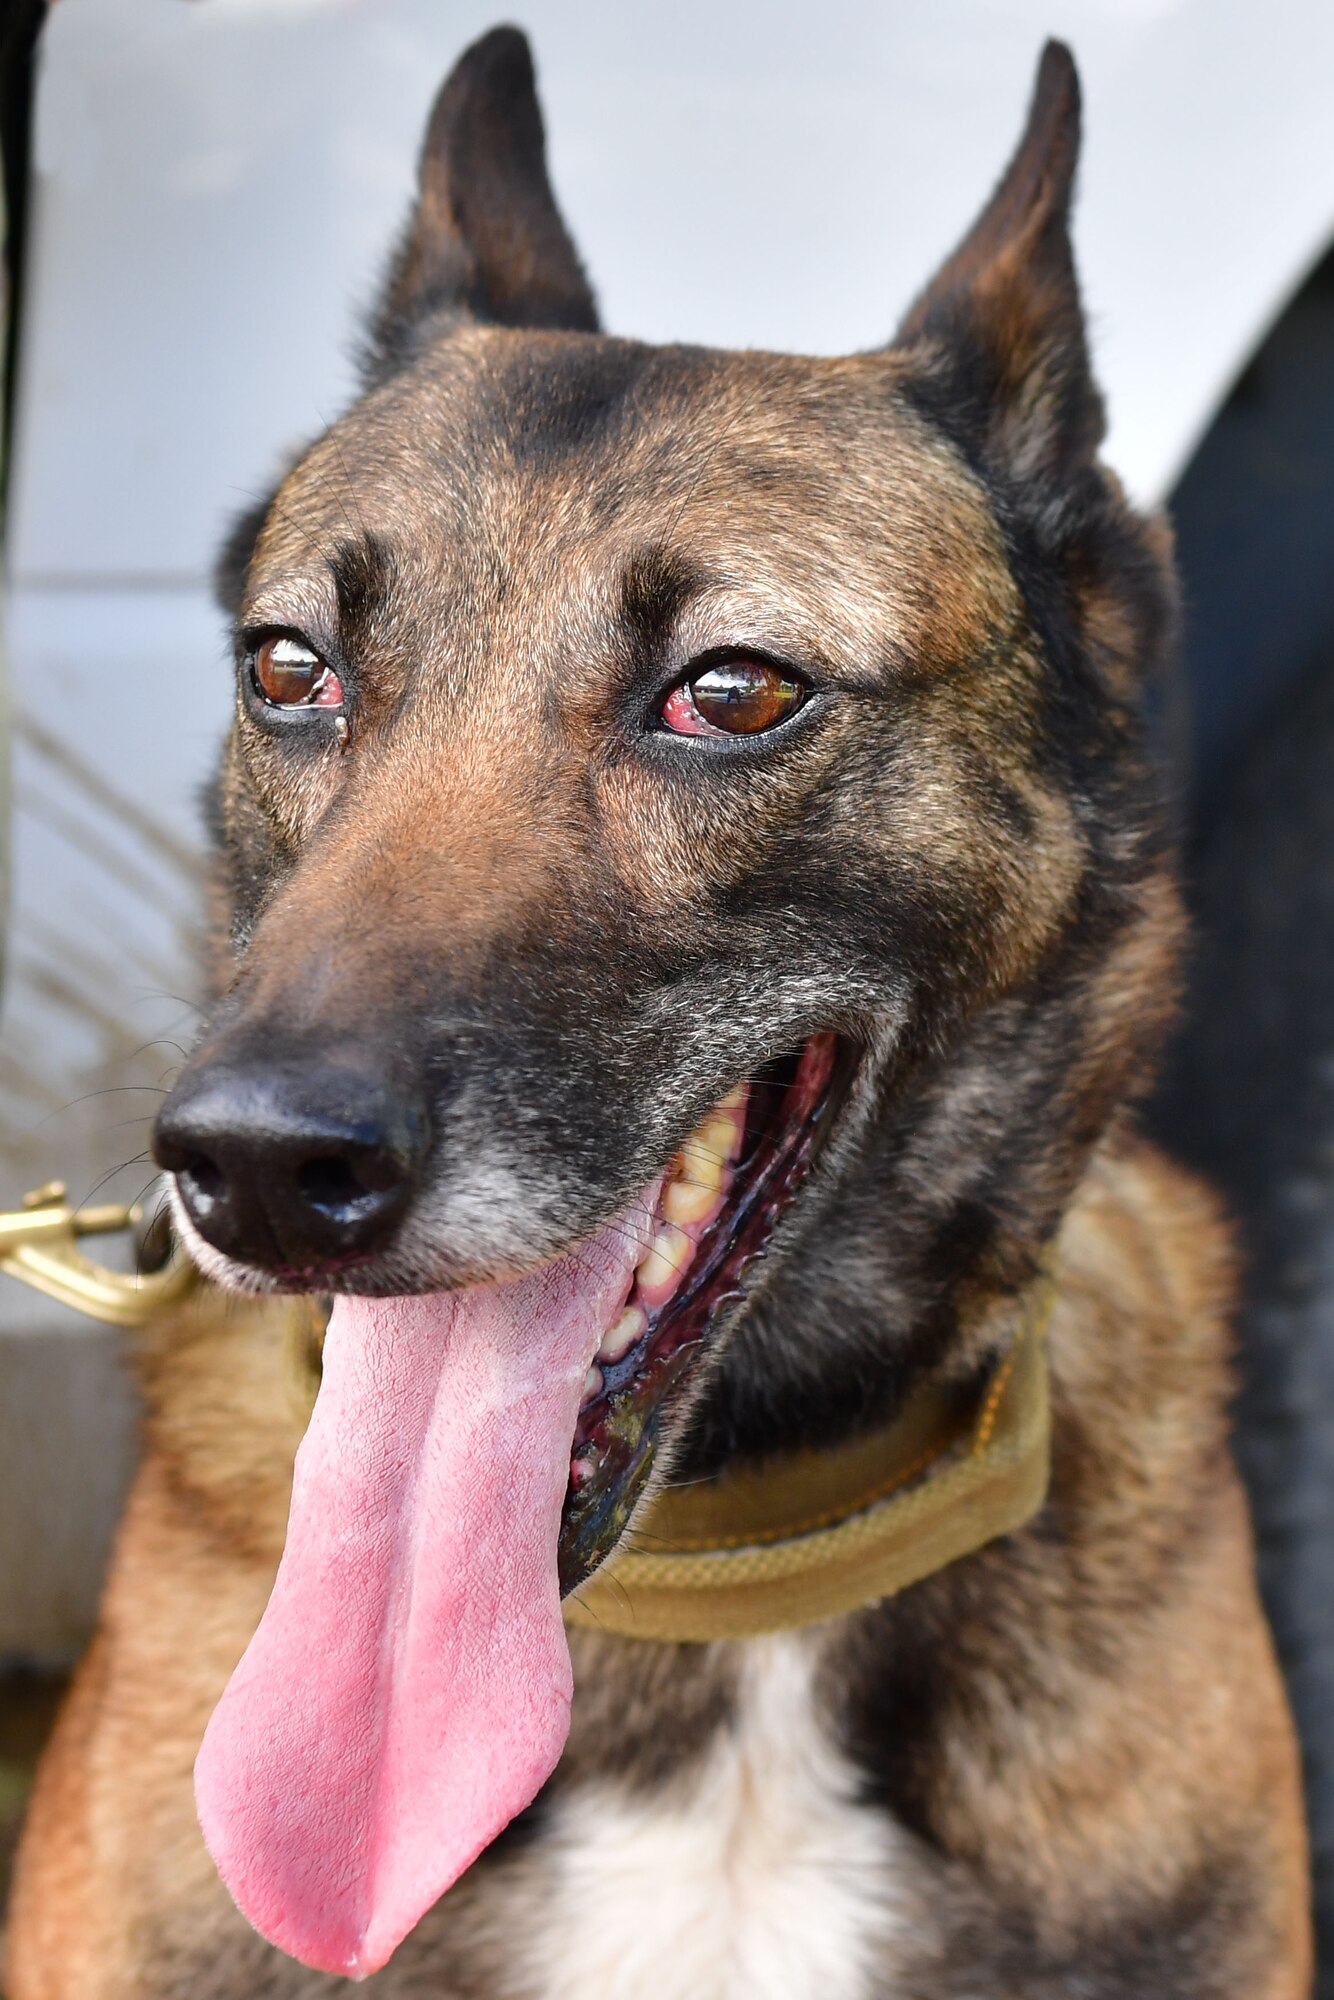 Military Working Dog Alfa is a drug detection dog who has been at Little Rock Air Force Base.